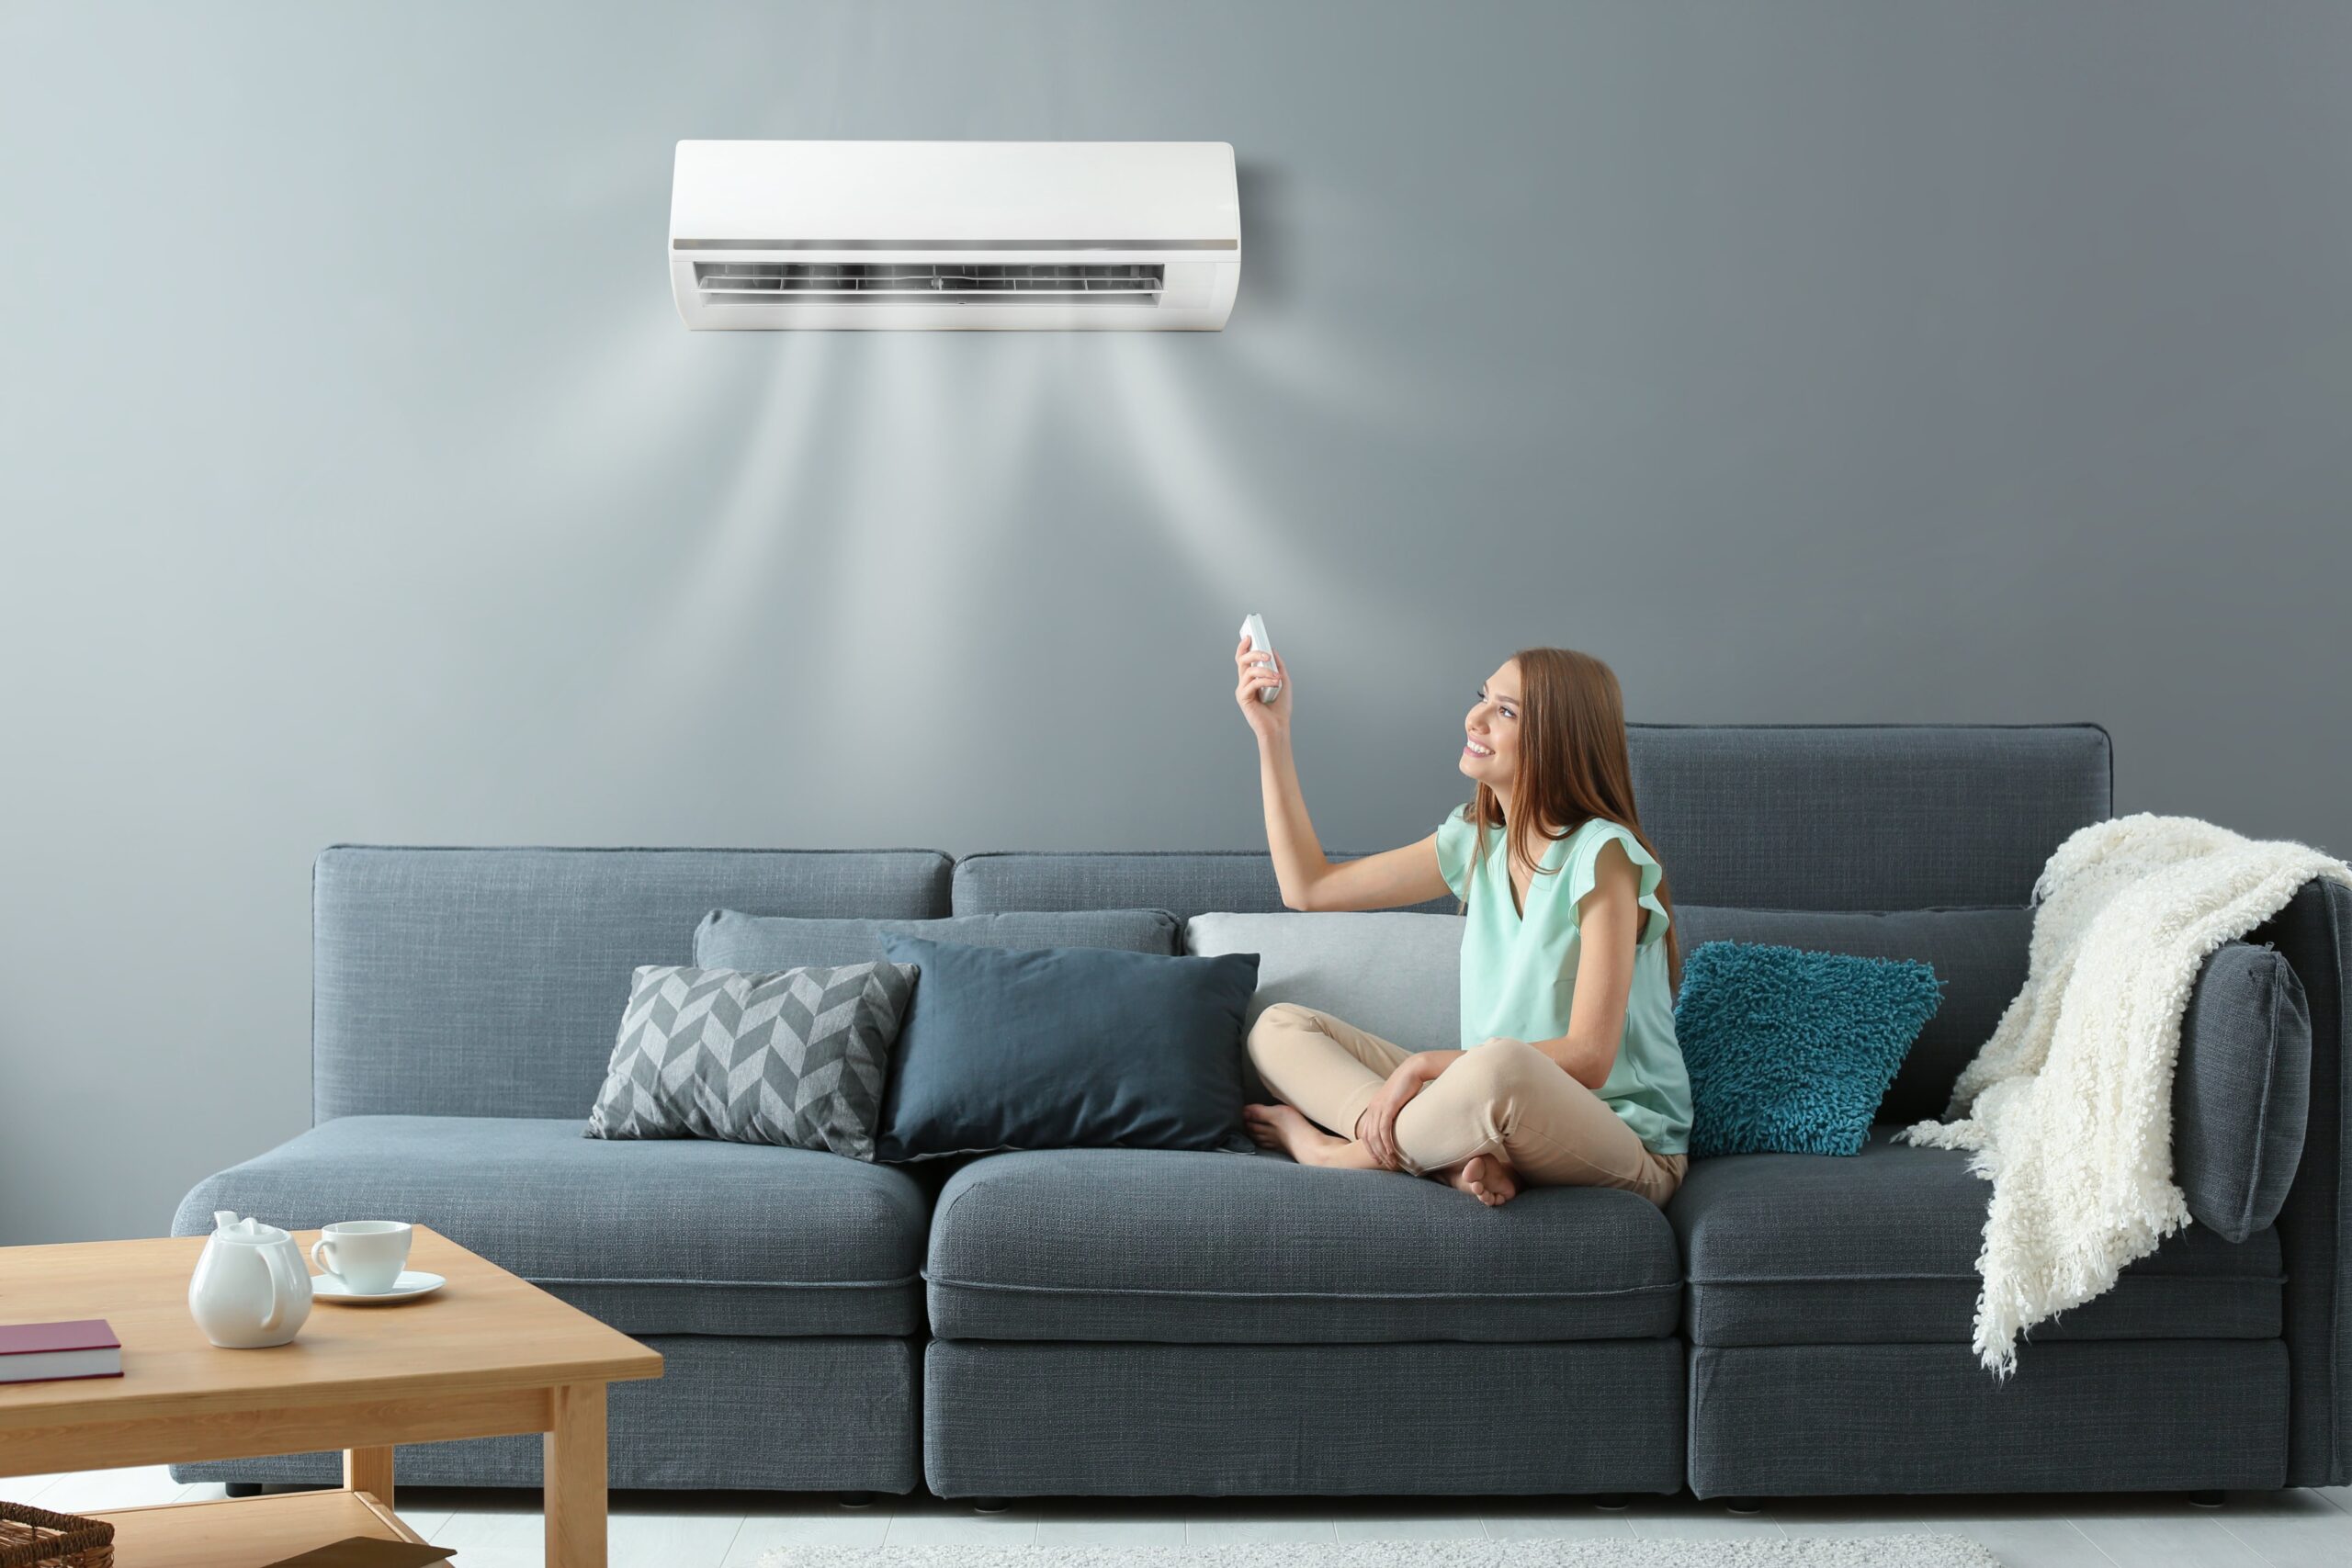 Types Of Air Conditioning